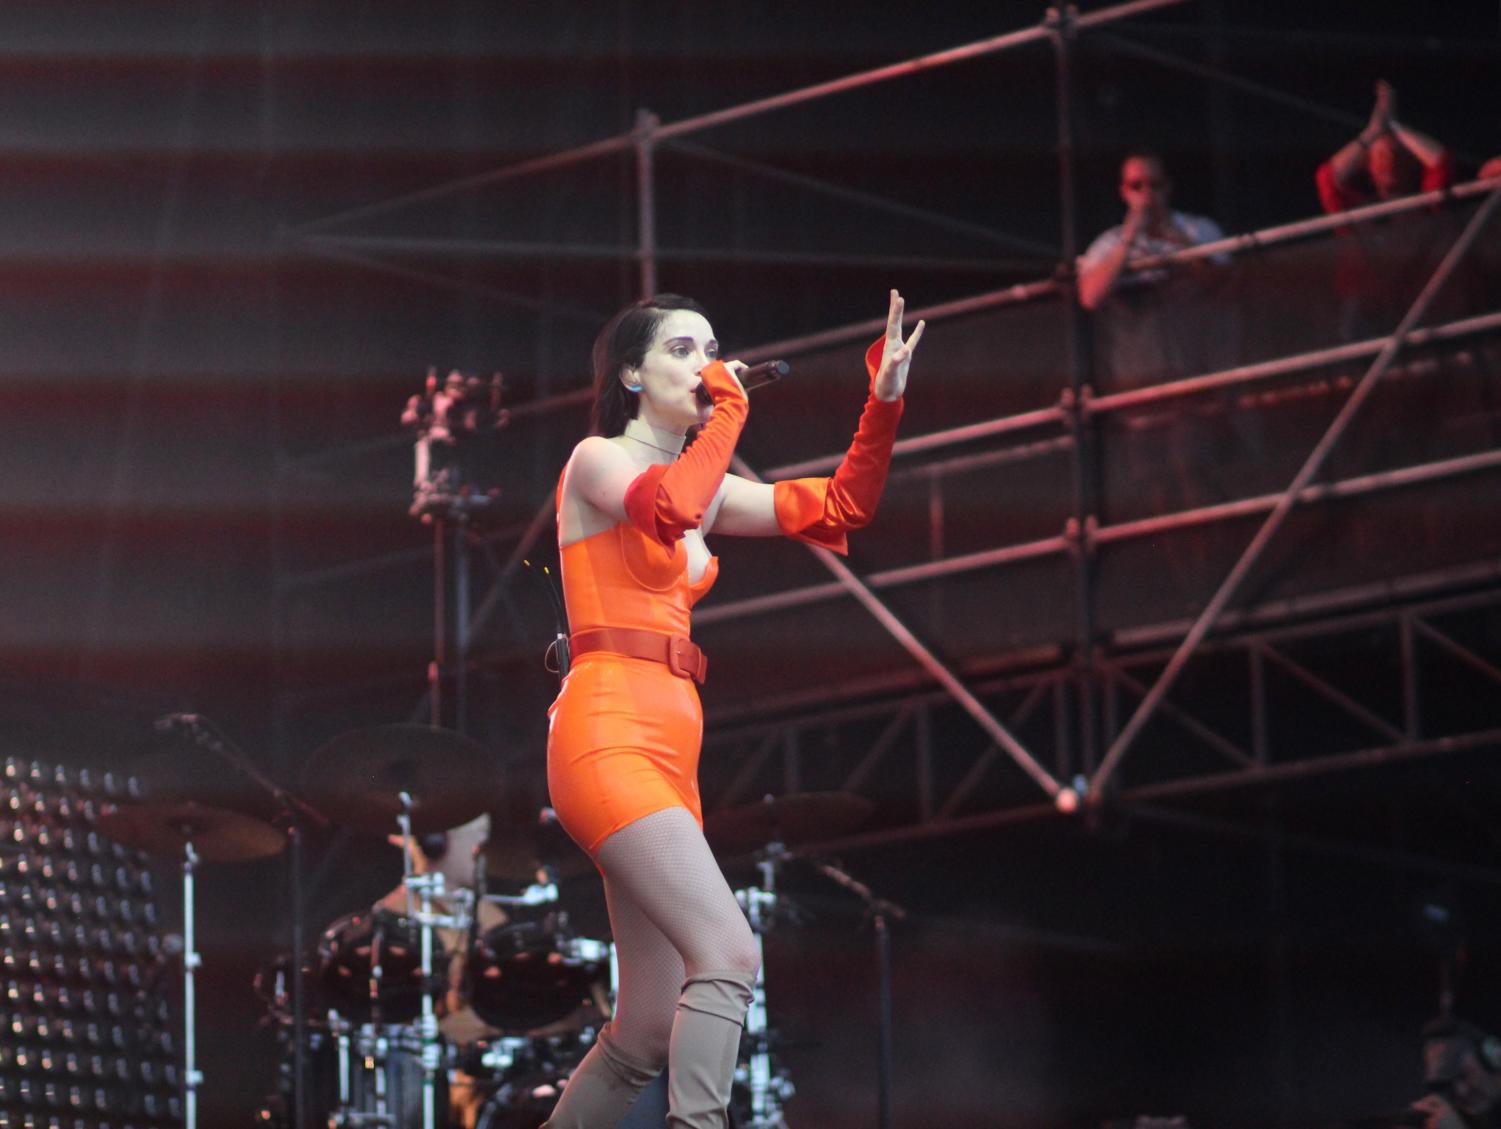 St. Vincent steps away from her guitar to close the show with a version of her song 